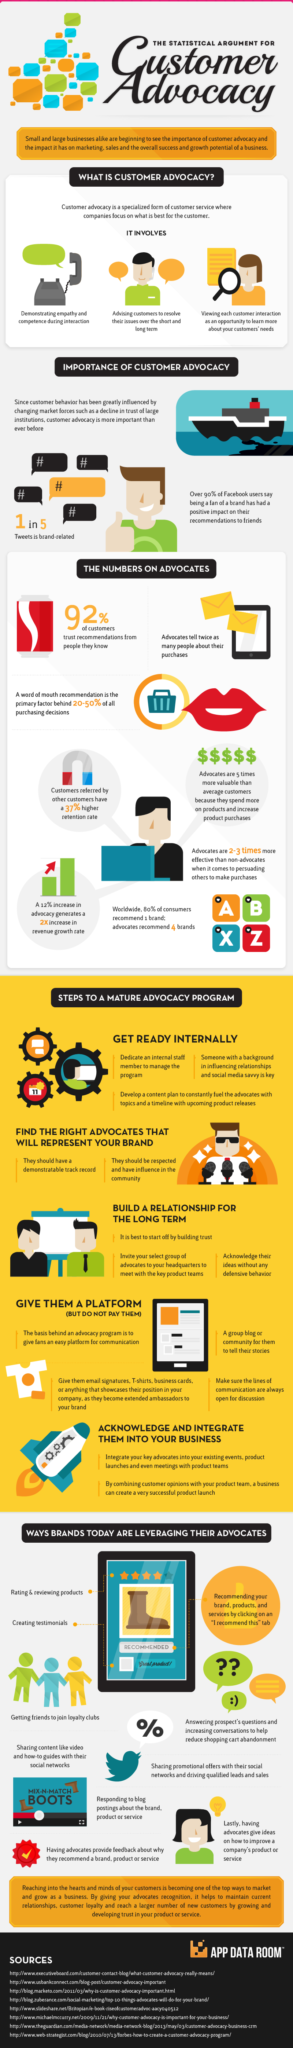 the-statistical-argument-for-customer-advocacy-infographic